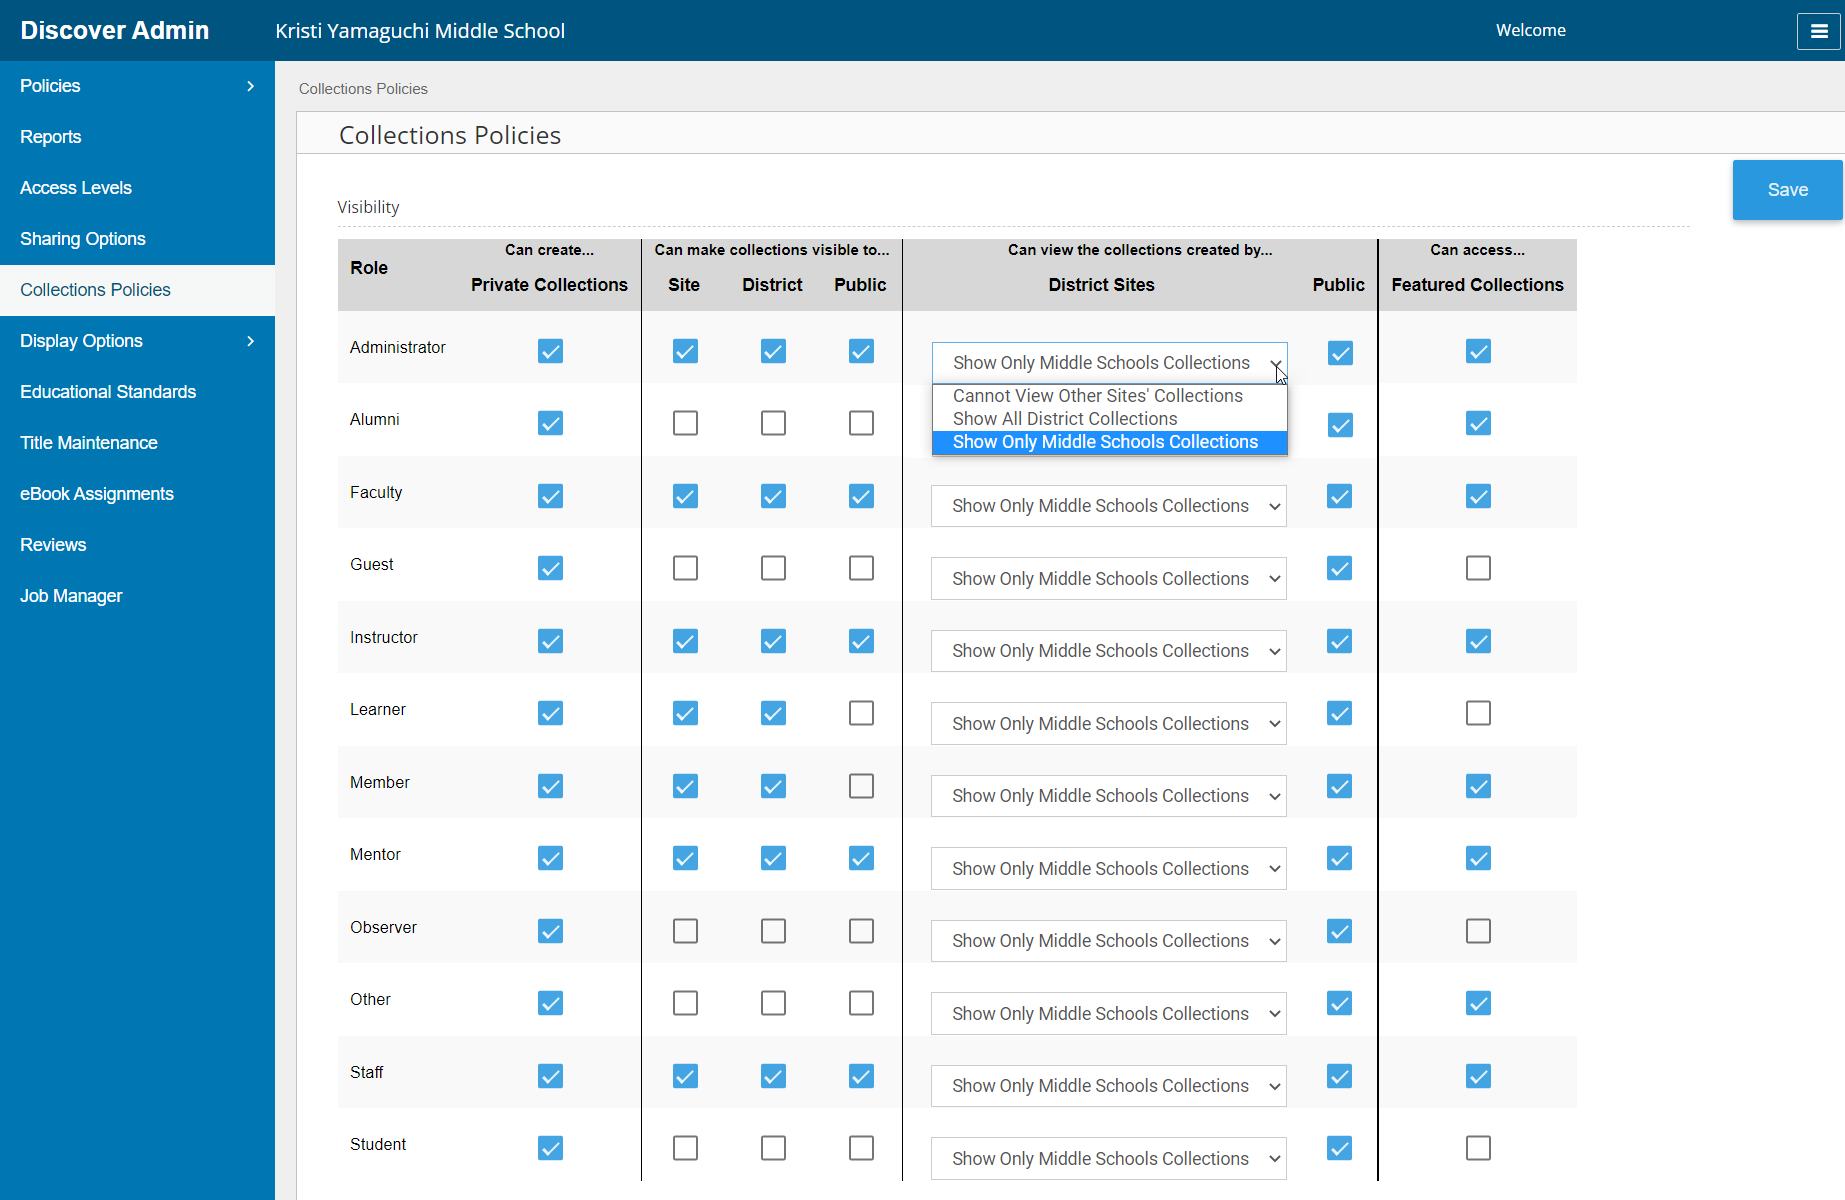 Collections Policies page with visibility options for individual roles.